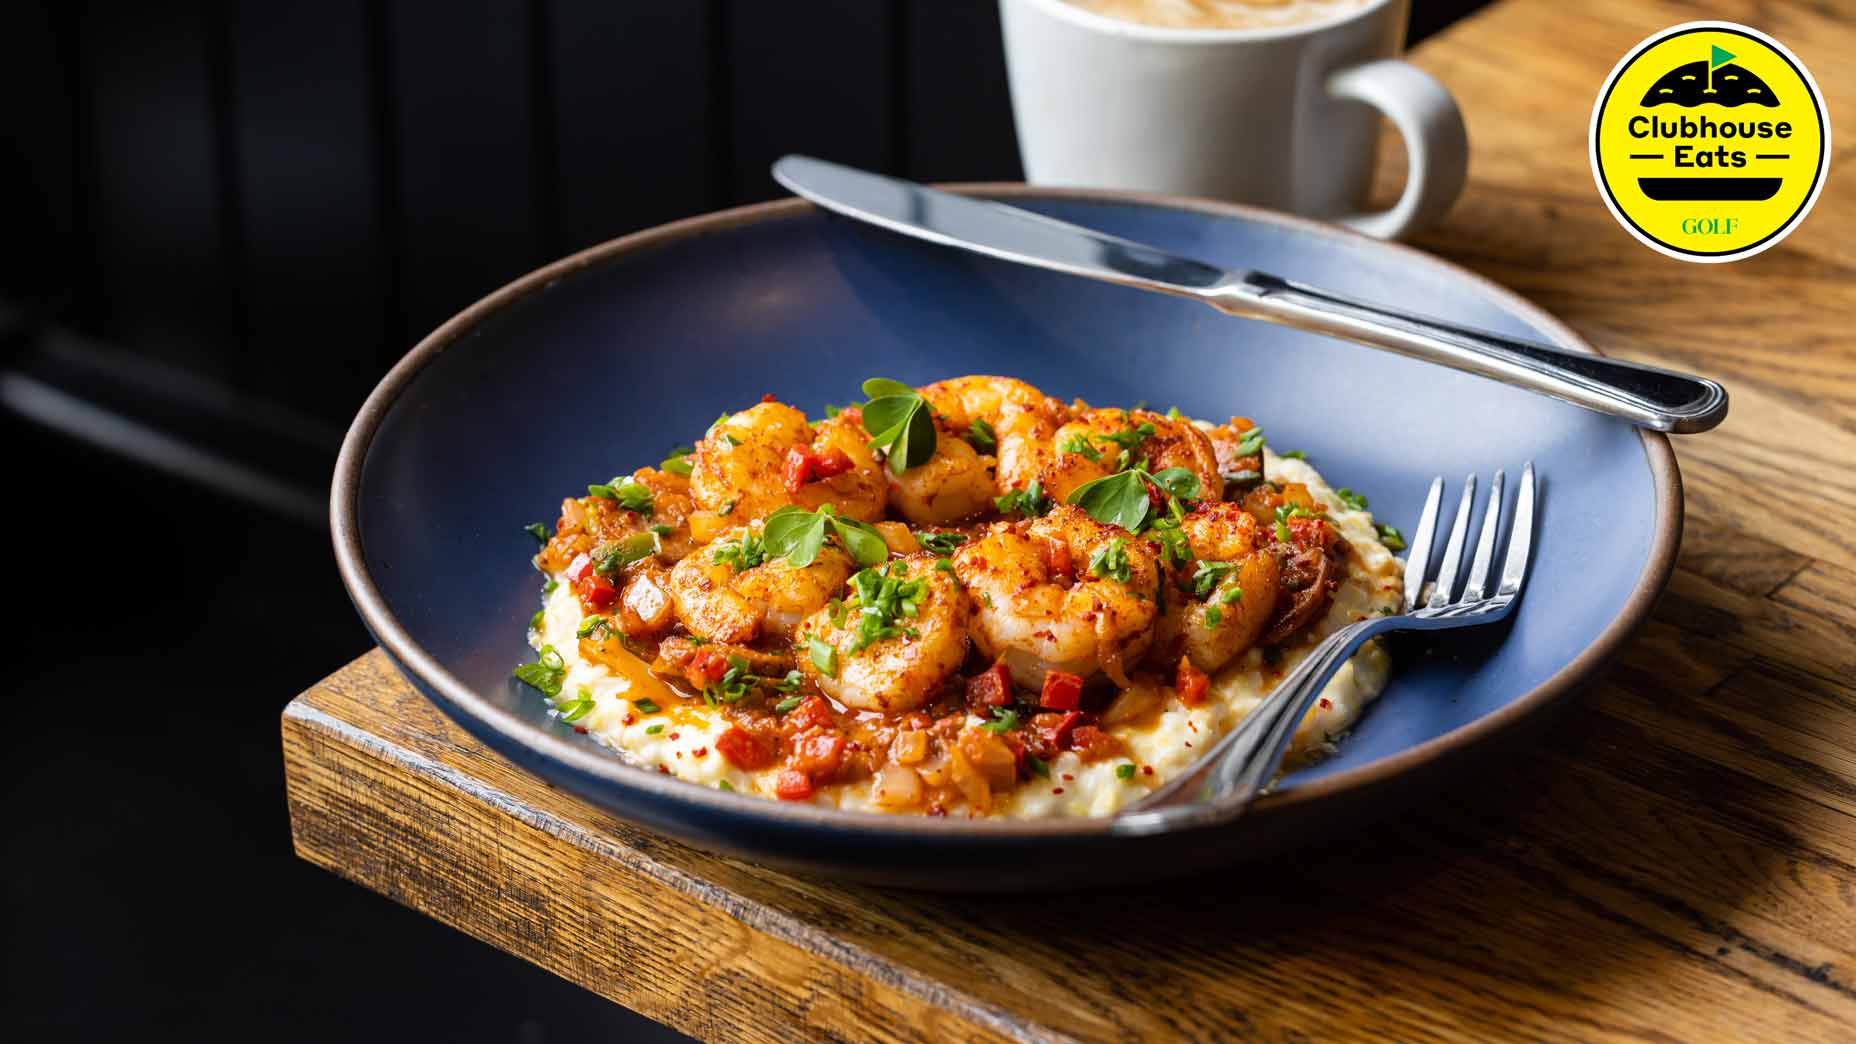 How to make exceptional shrimp and grits, according to a golf-club chef